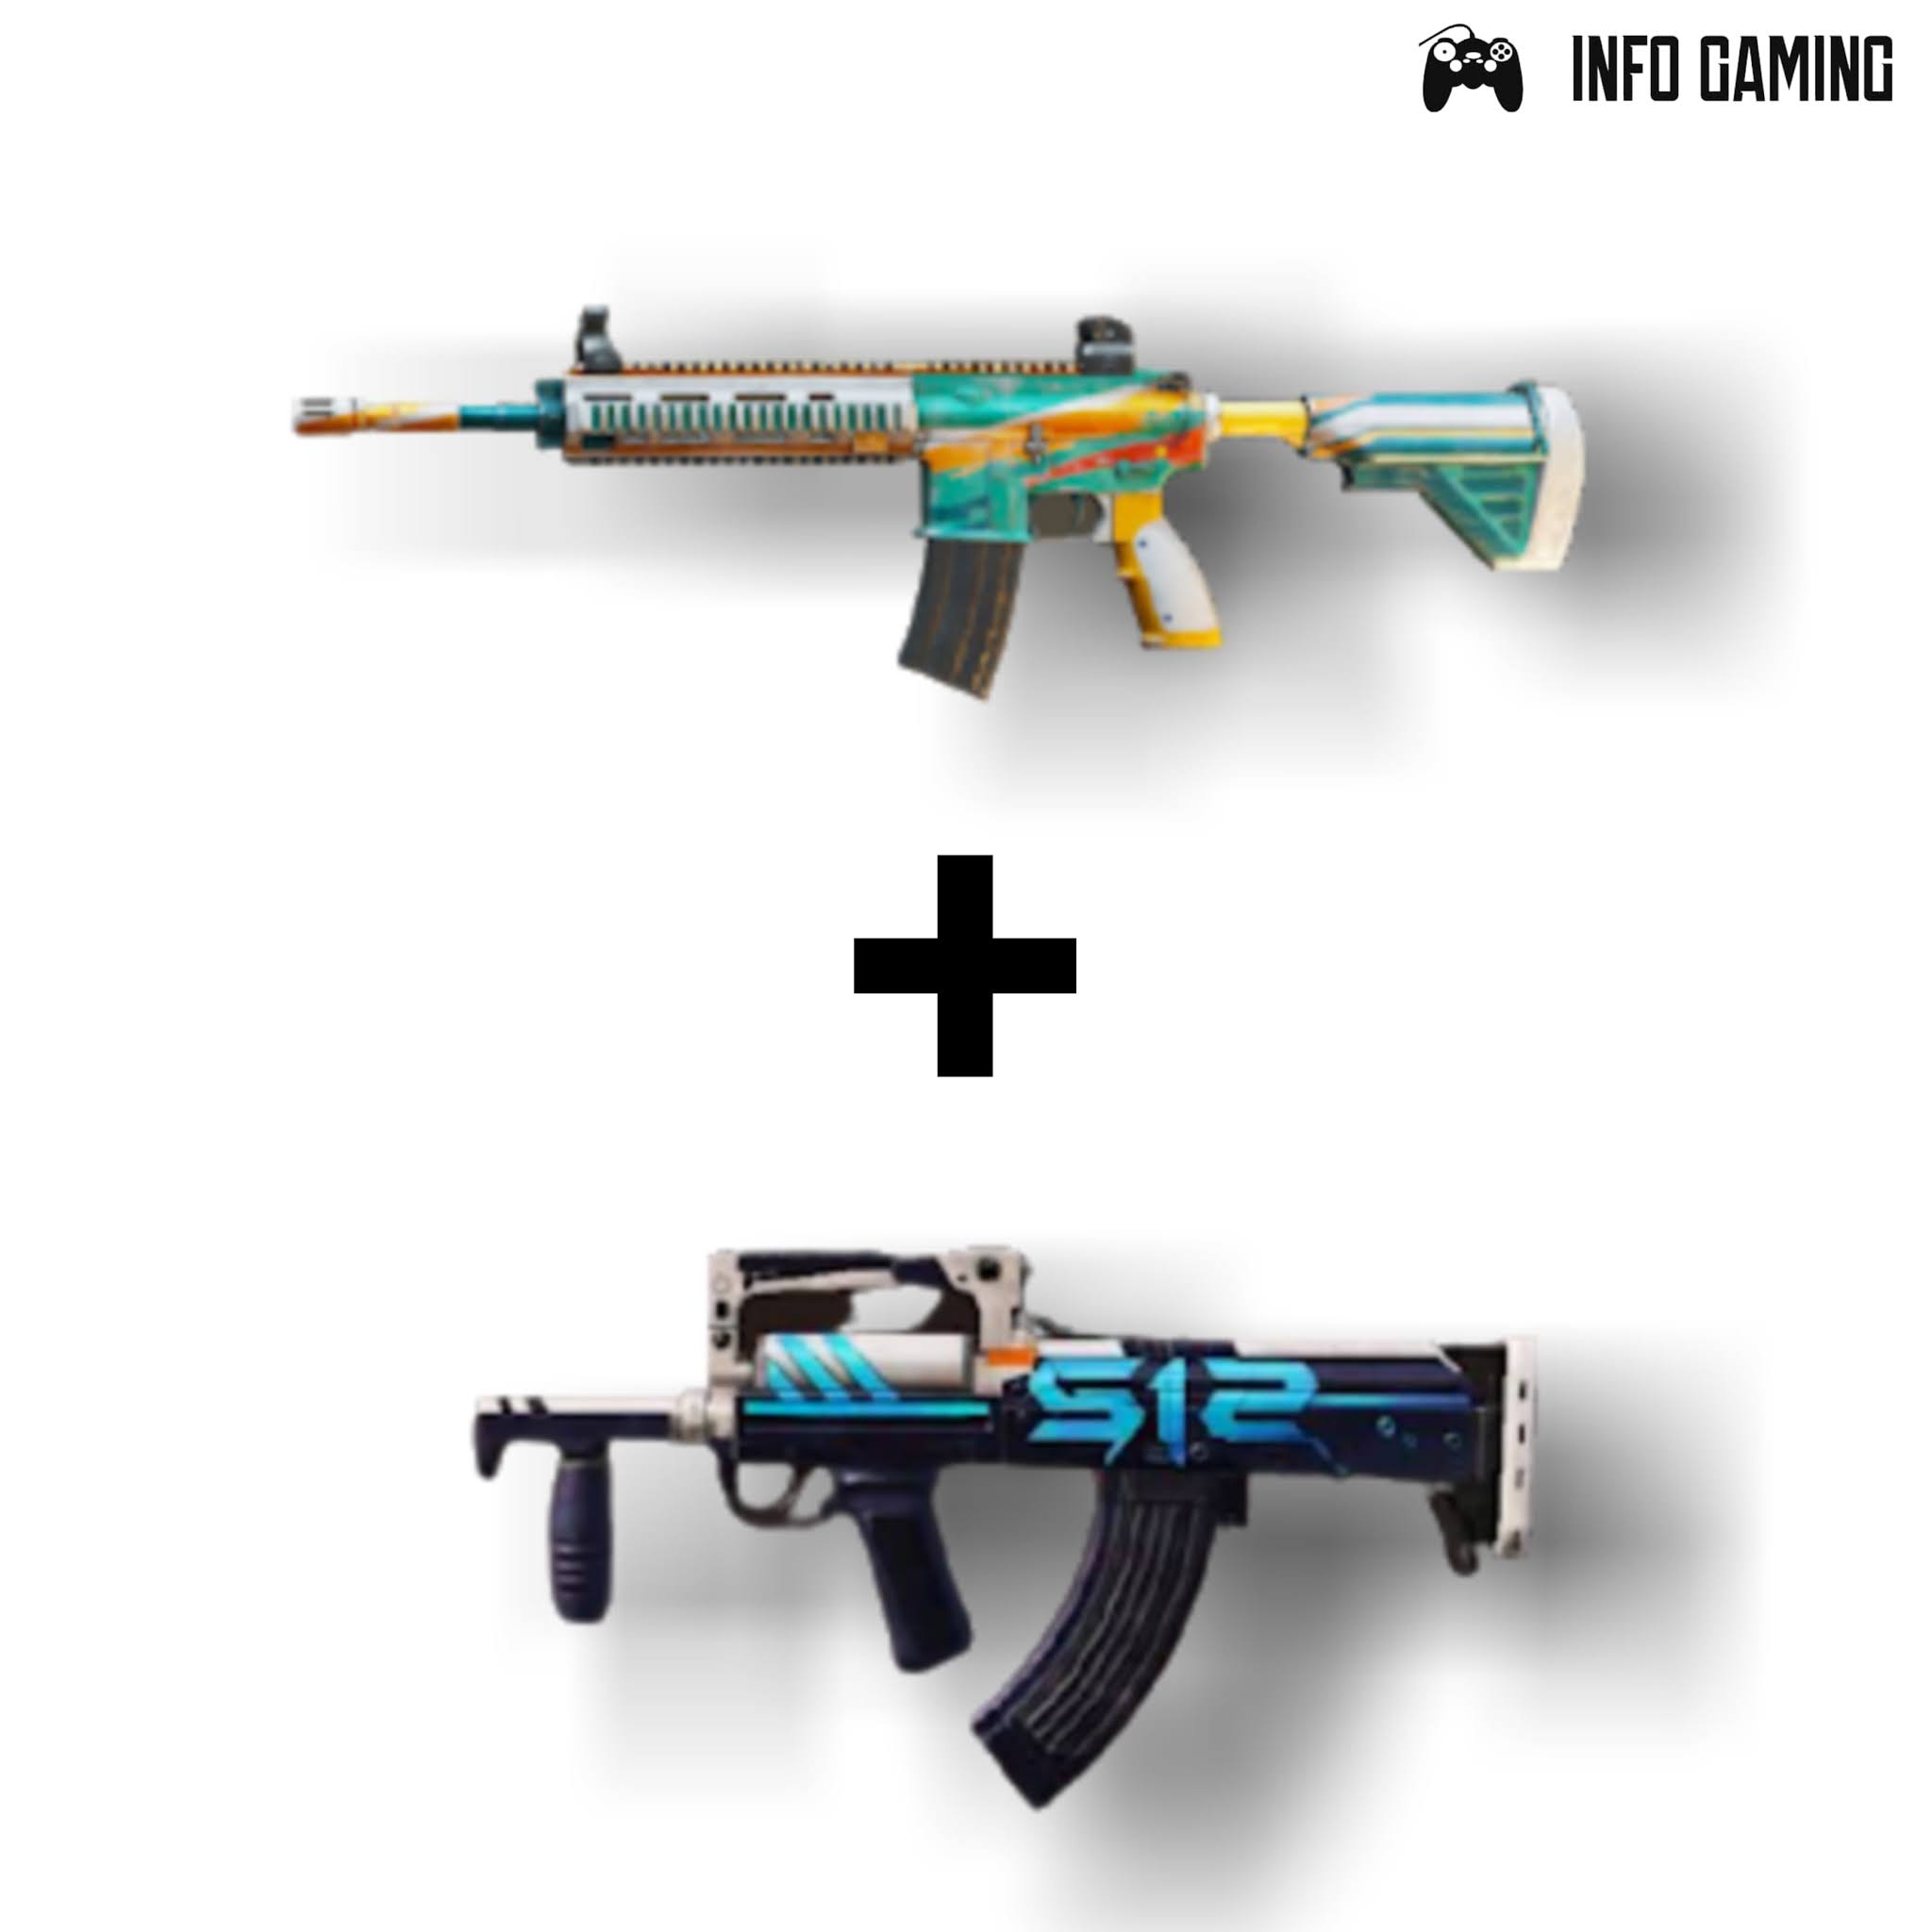 Groza+M416, Top 5 Weapon Combinations in PUBG Mobile in 2021